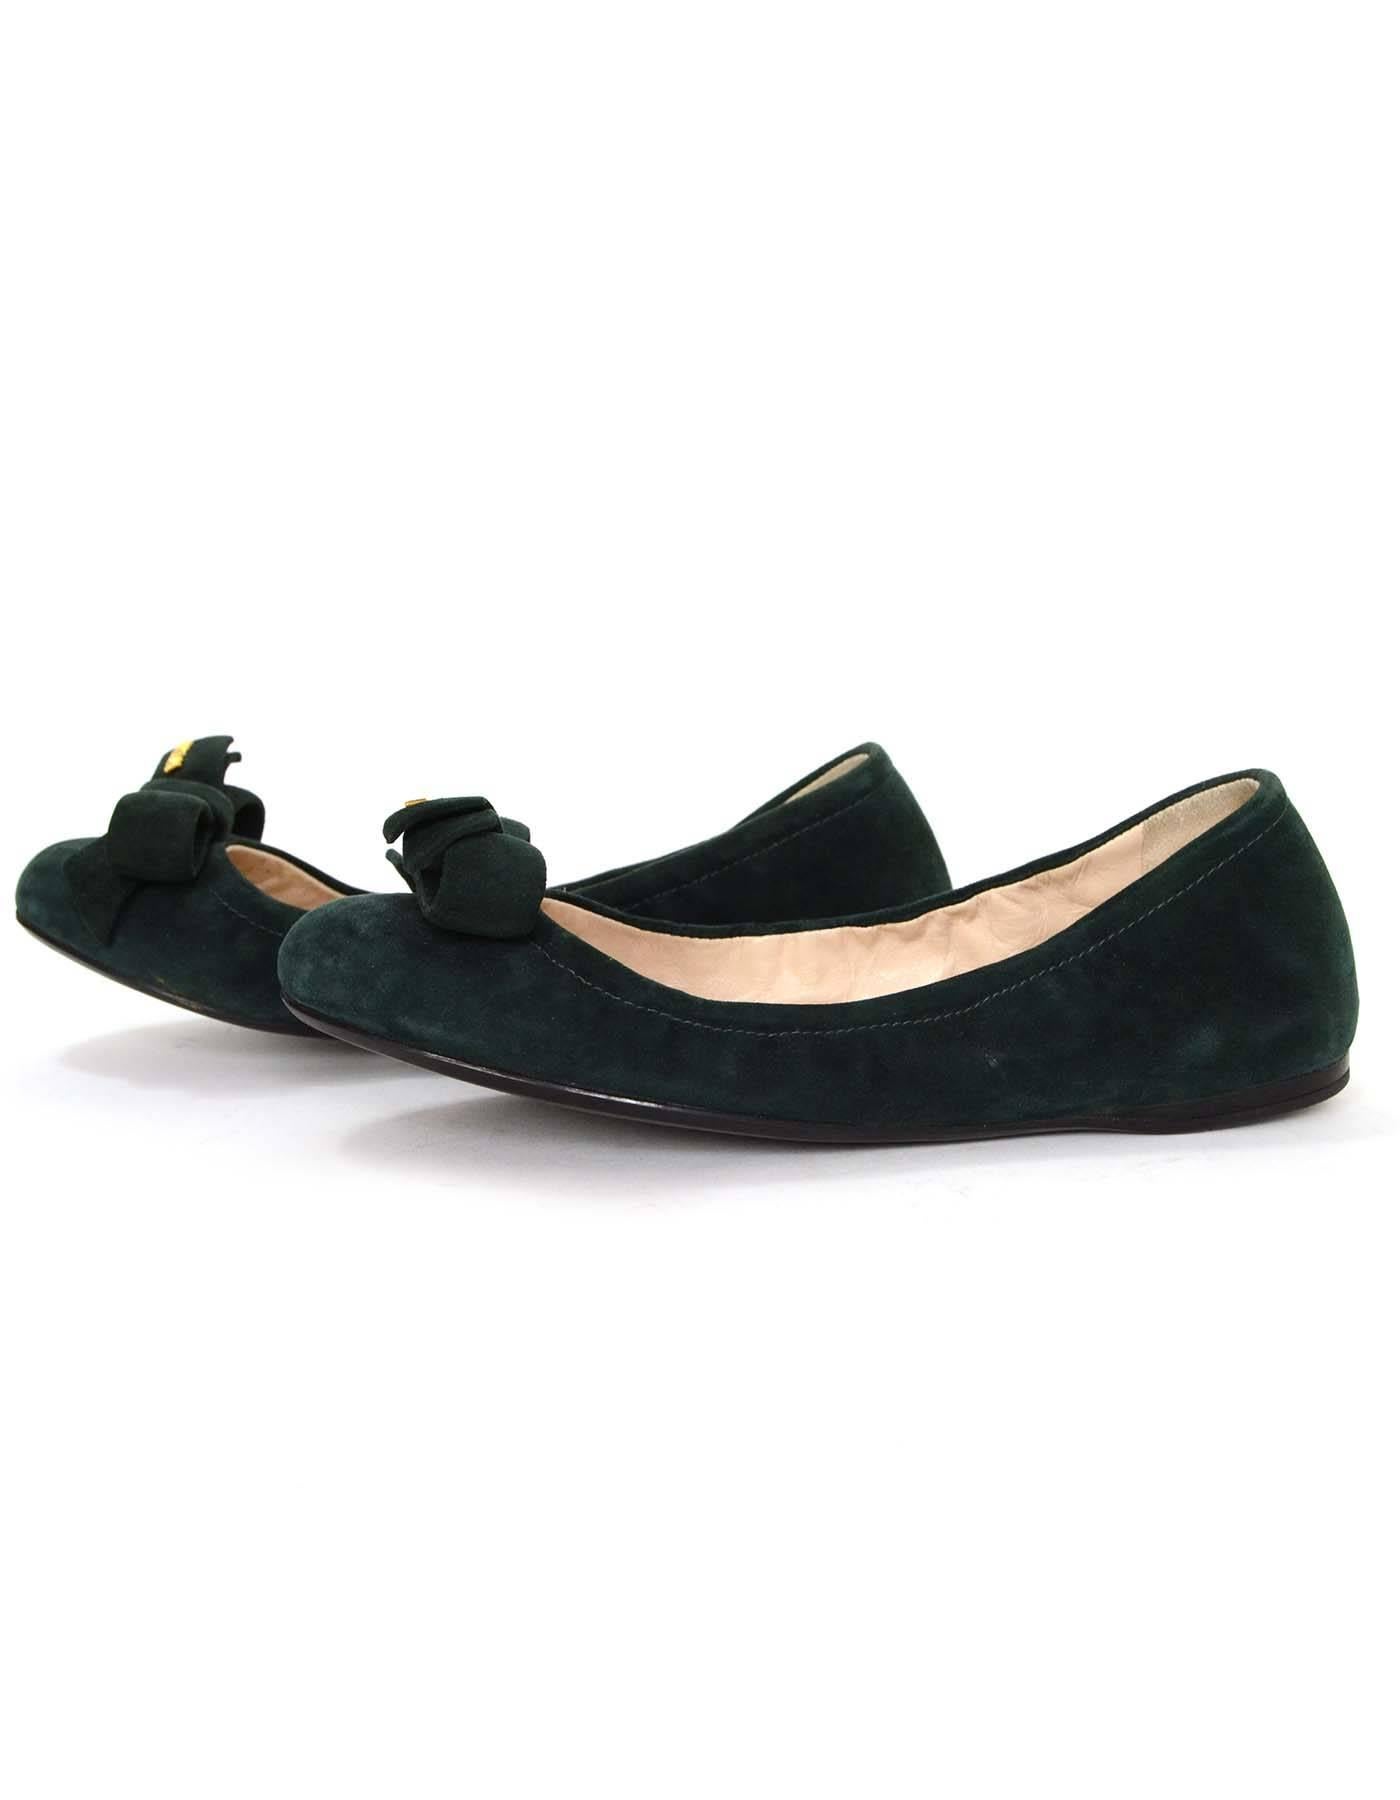 Prada Green Suede Ballet Flats 
Features large suede bow at toe with Prada in goldtone metal
Made In: Vietnam
Color: Green
Materials: Suede
Closure/Opening: Slide on with elastic opening
Sole Stamp: Prada
Overall Condition: Excellent